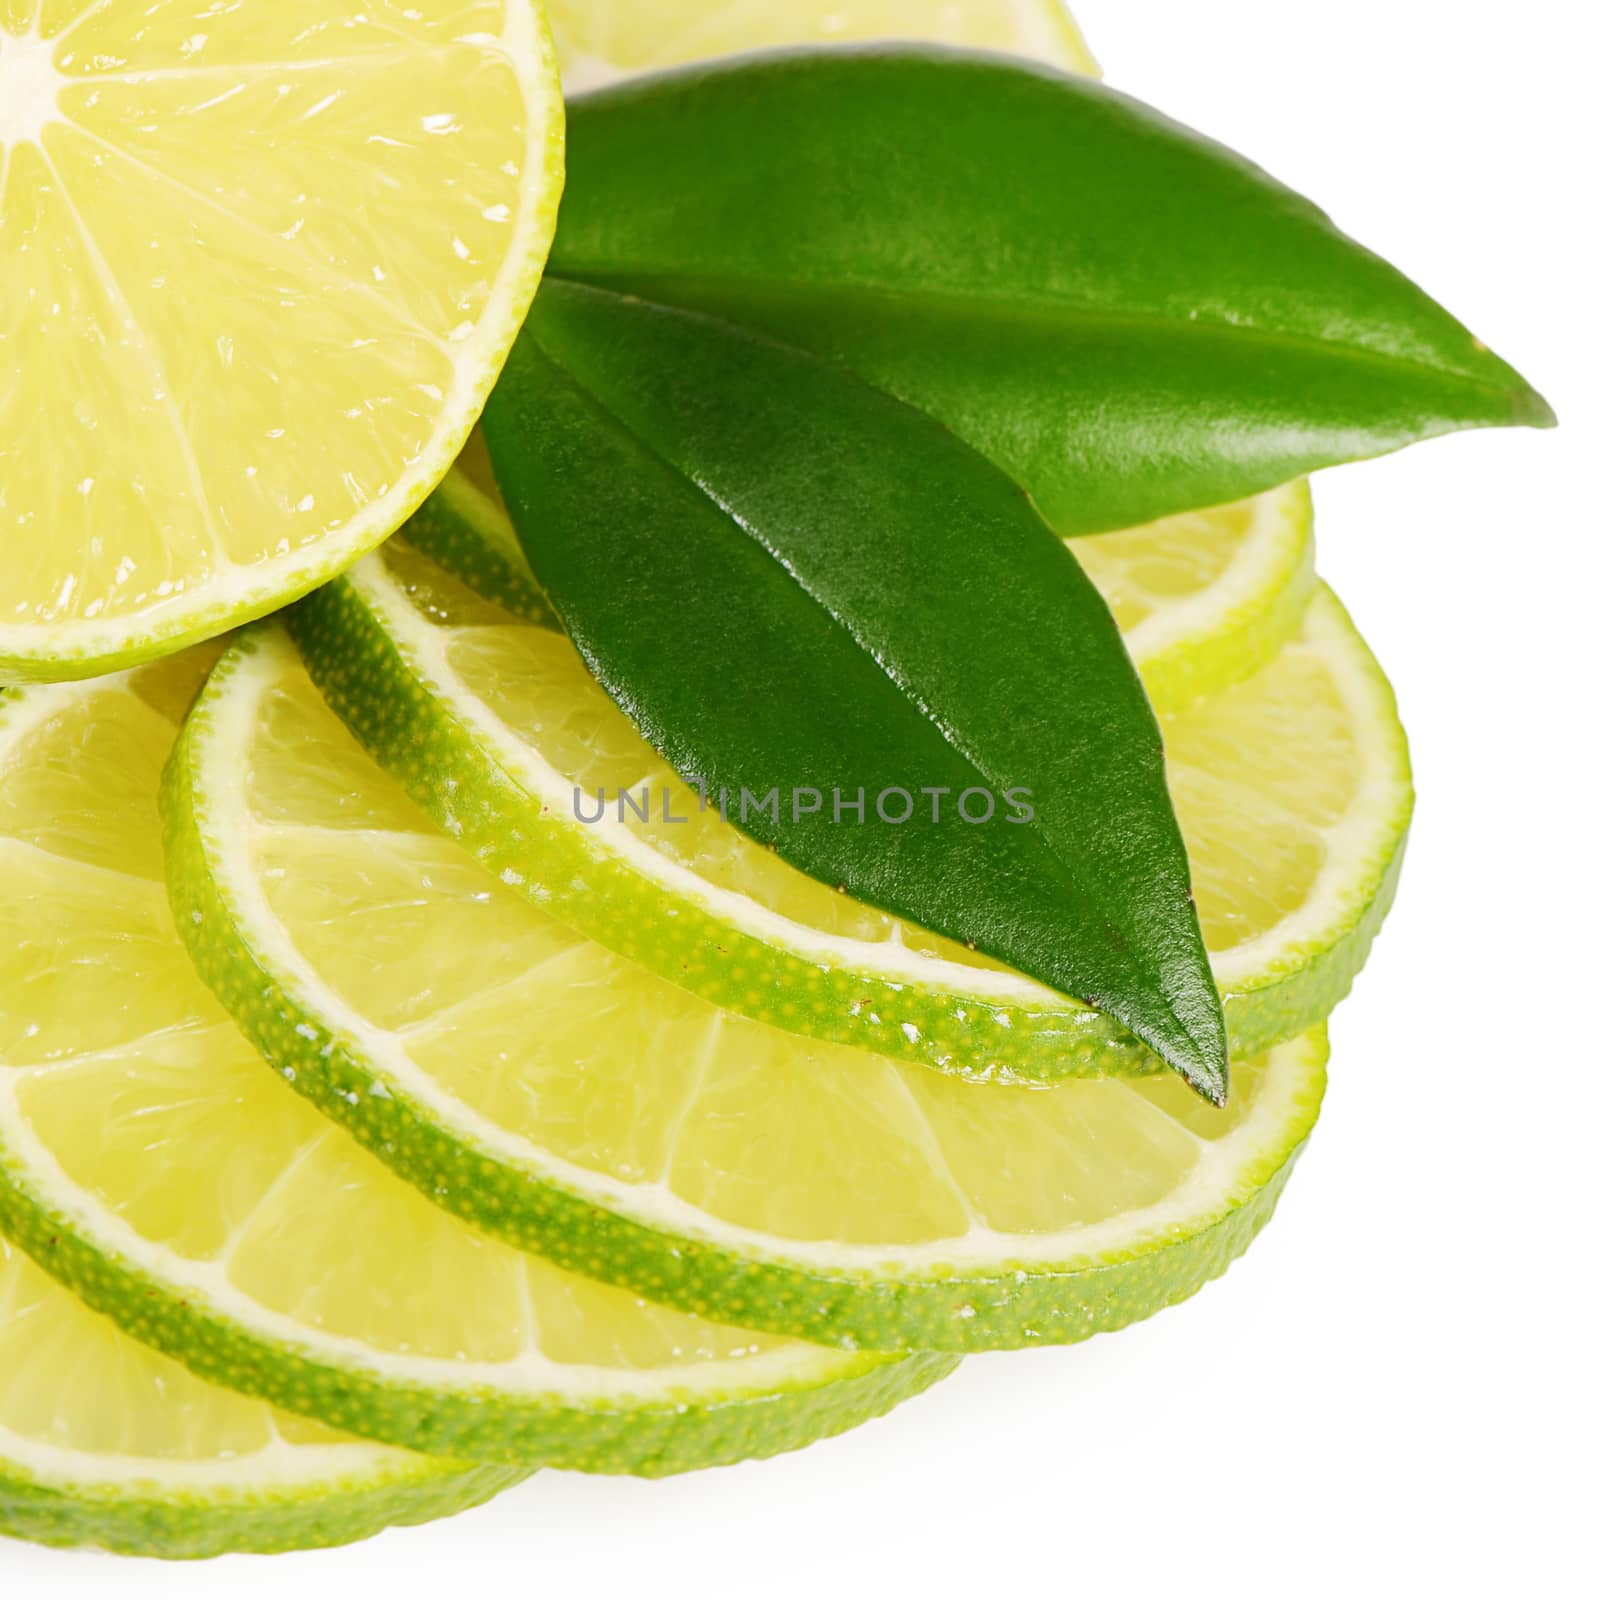 The fresh lime isolated on white background